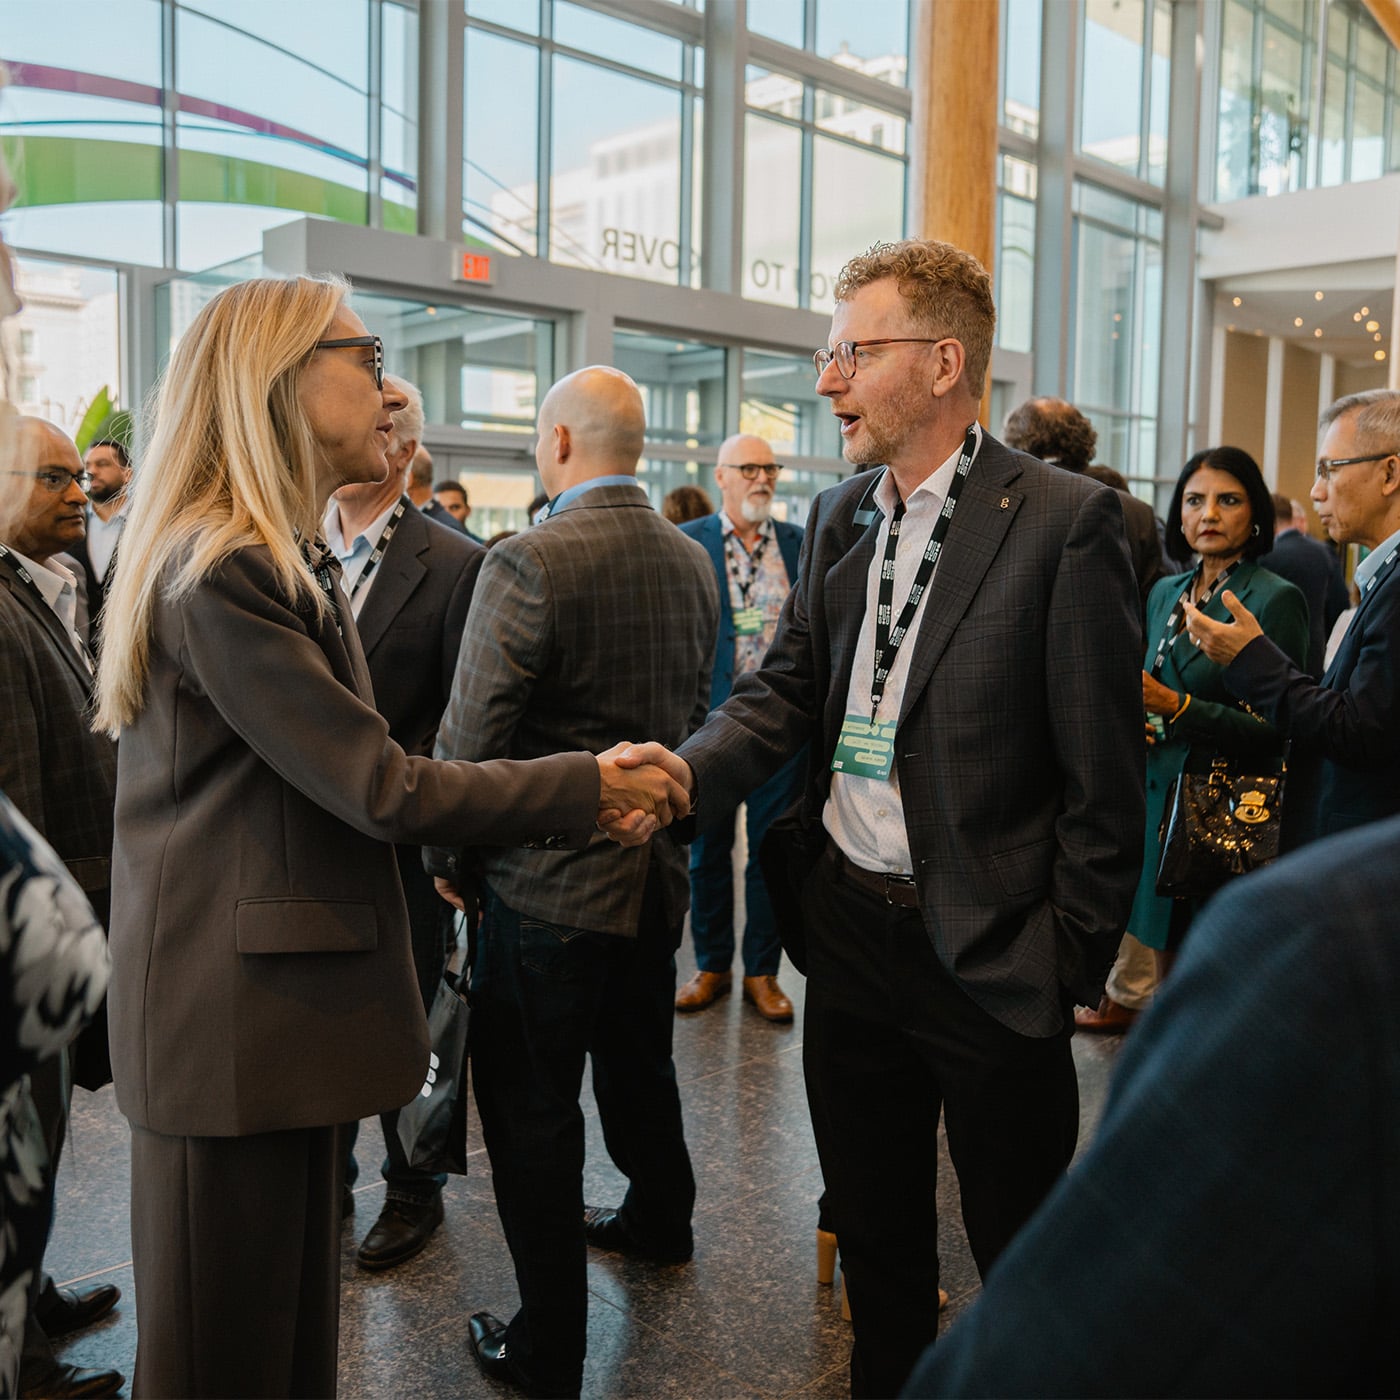 Industry professionals shaking hands at conference